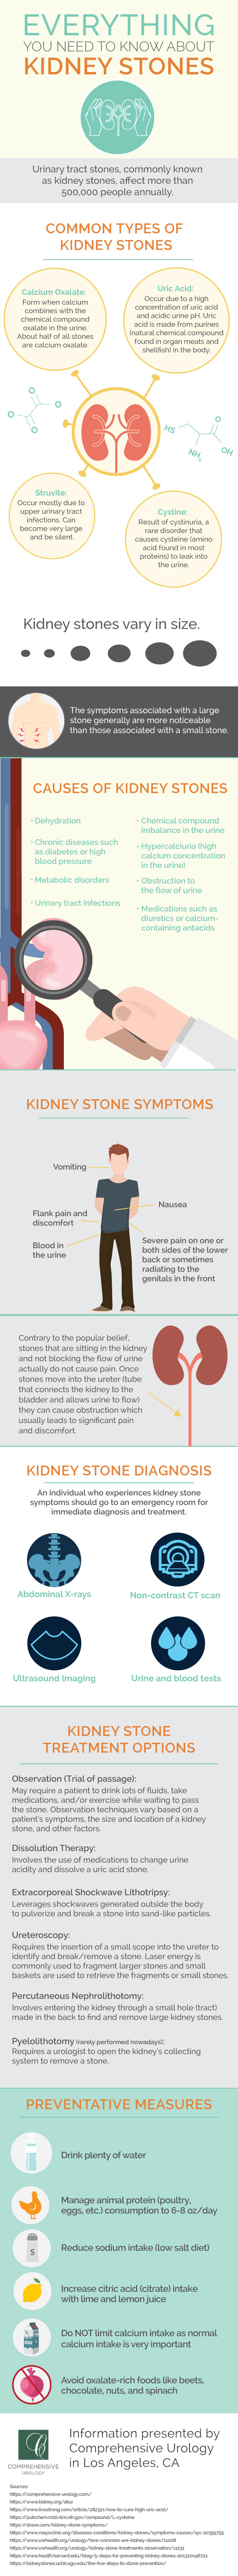 All about kidney stones